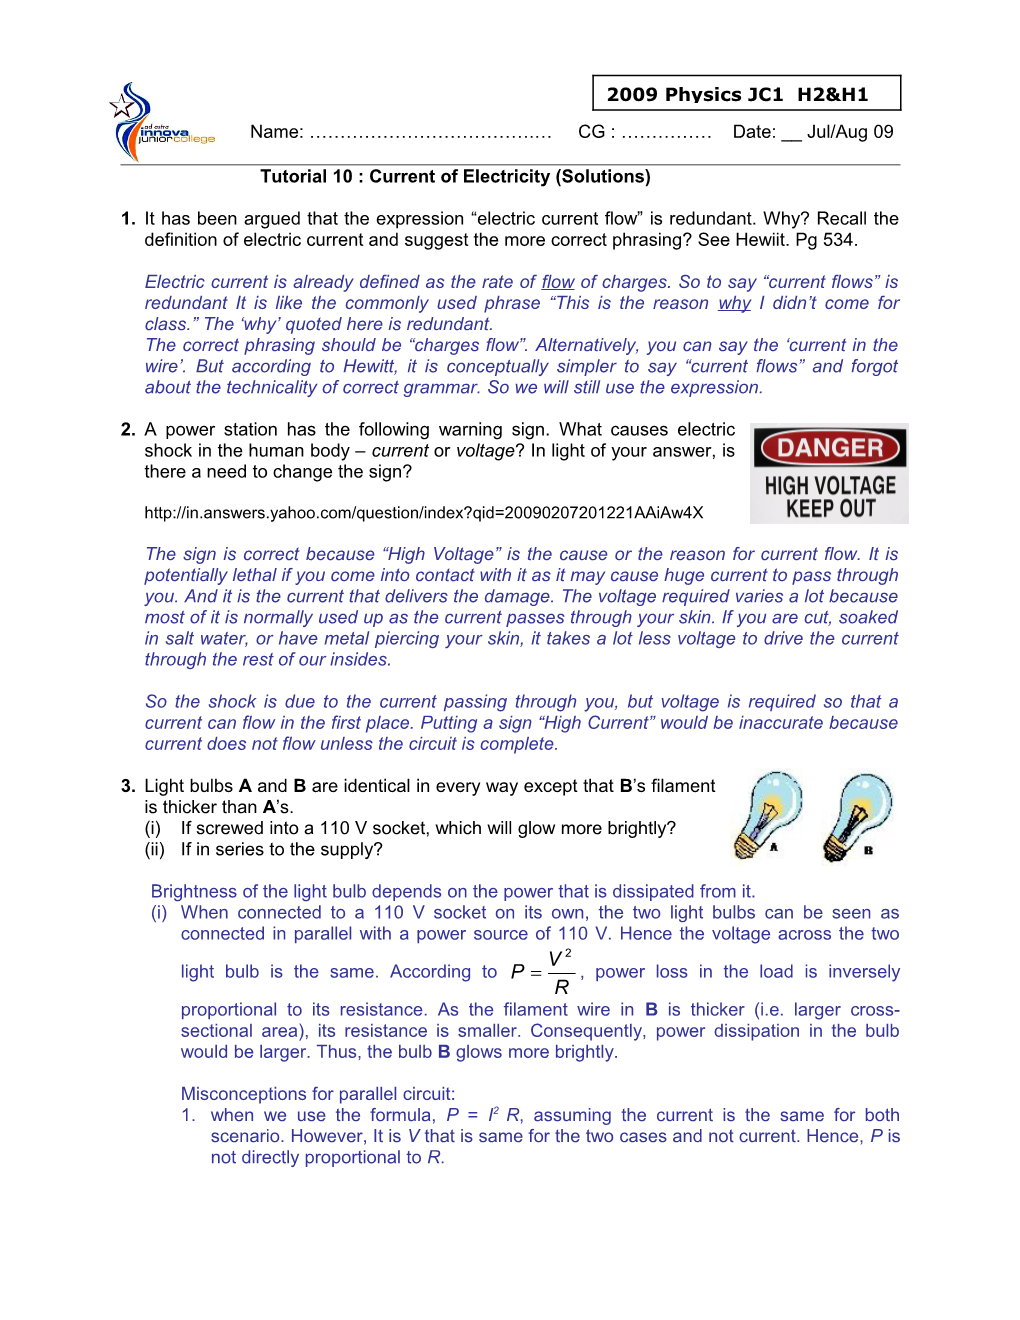 Tutorial 10 : Current of Electricity (Solutions)